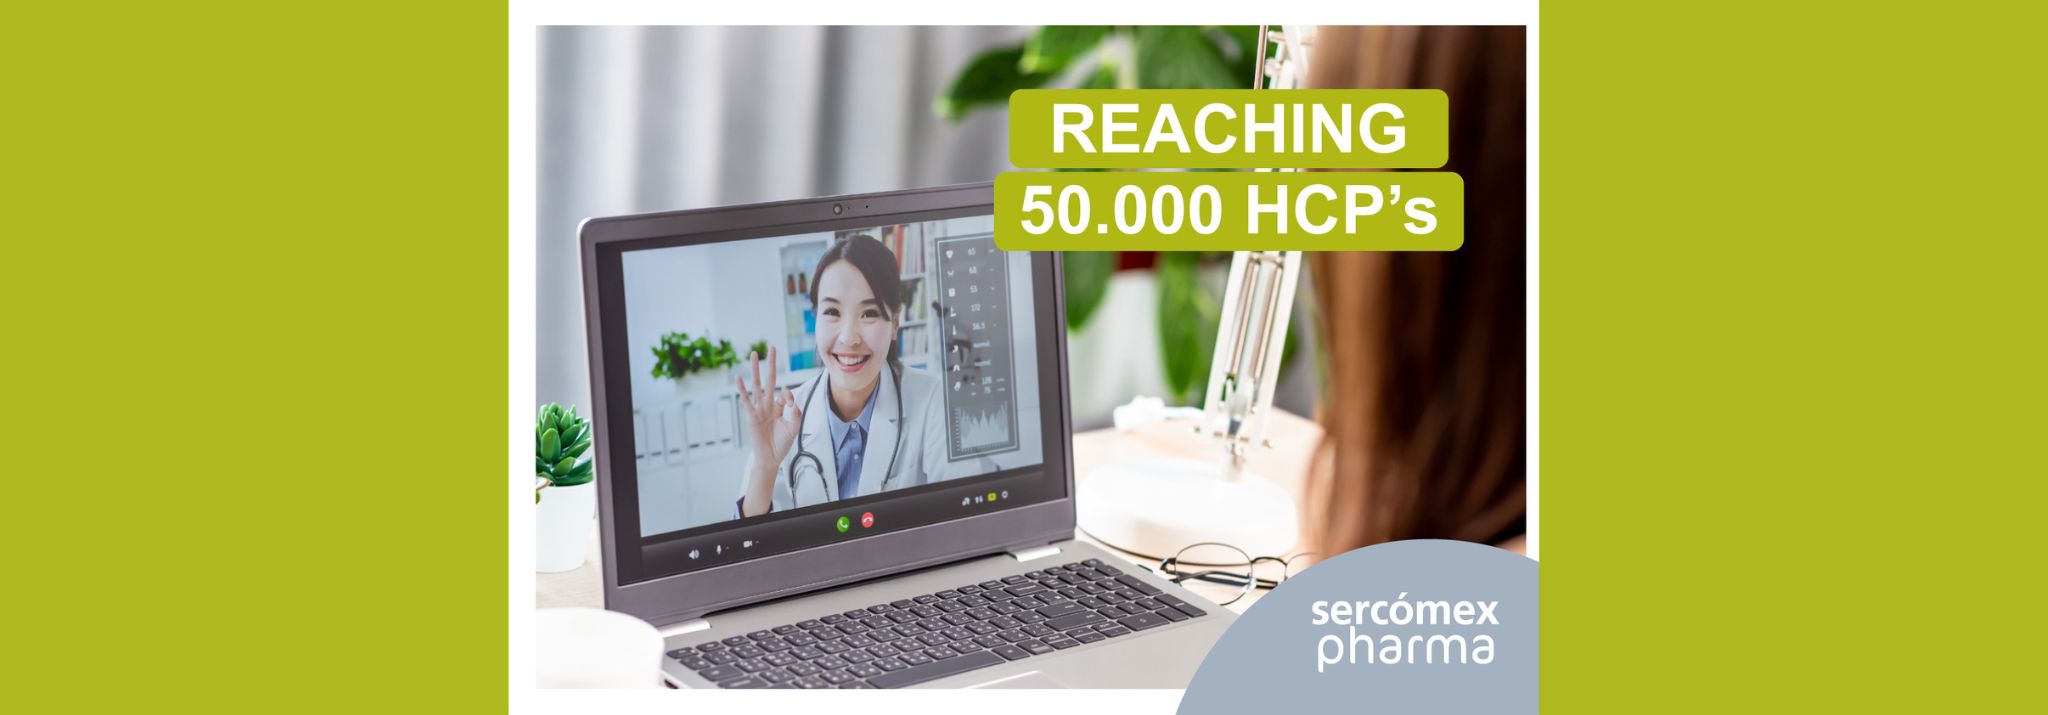 Sercómex Pharma reached 50,000 participants in its omnichannel programs